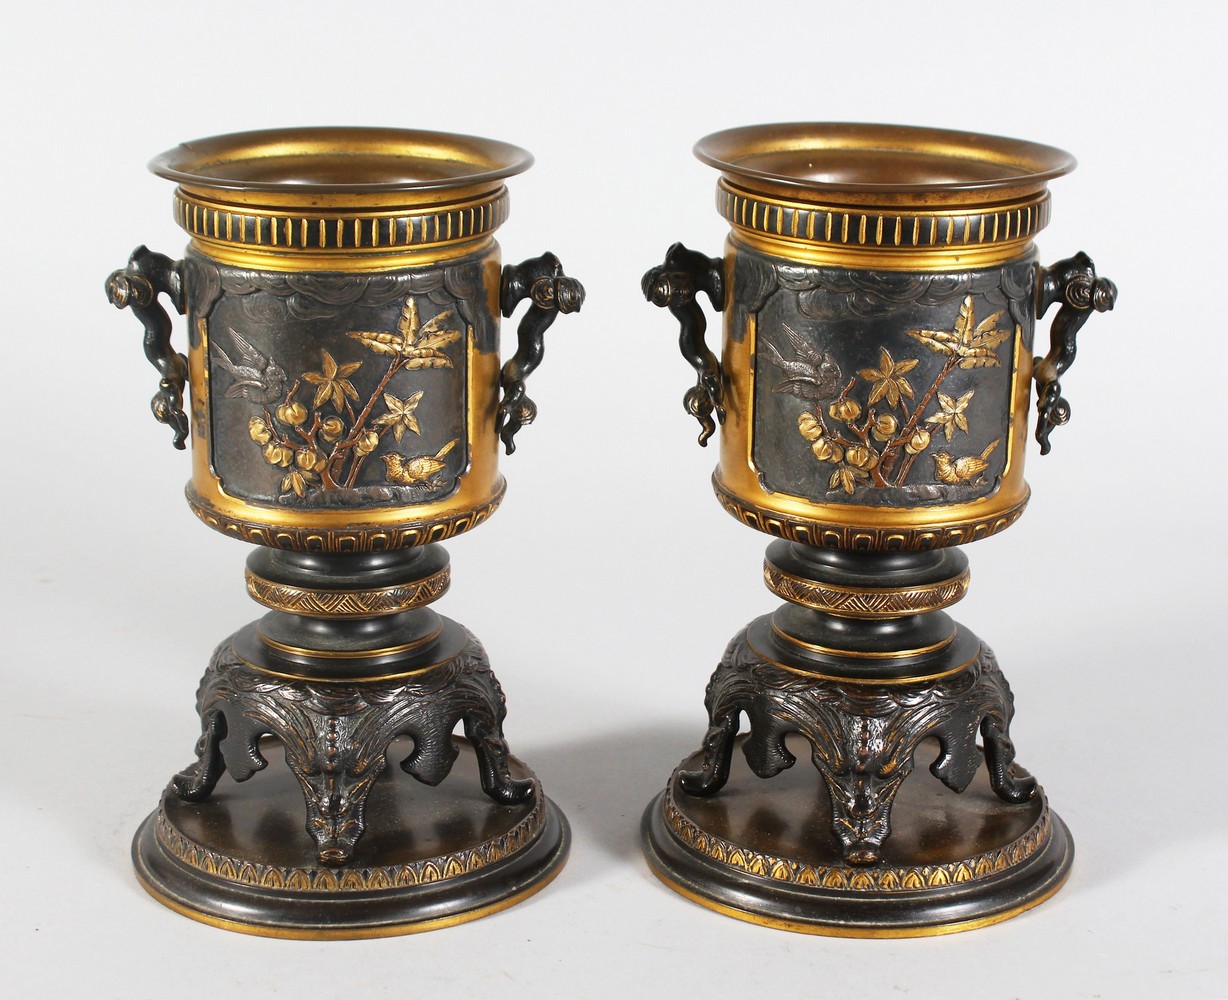 A GOOD PAIR OF EARLY 20TH CENTURY BARBEDIENNE & JAPANESE STYLE AESTHETIC MIXED METAL VASES, each